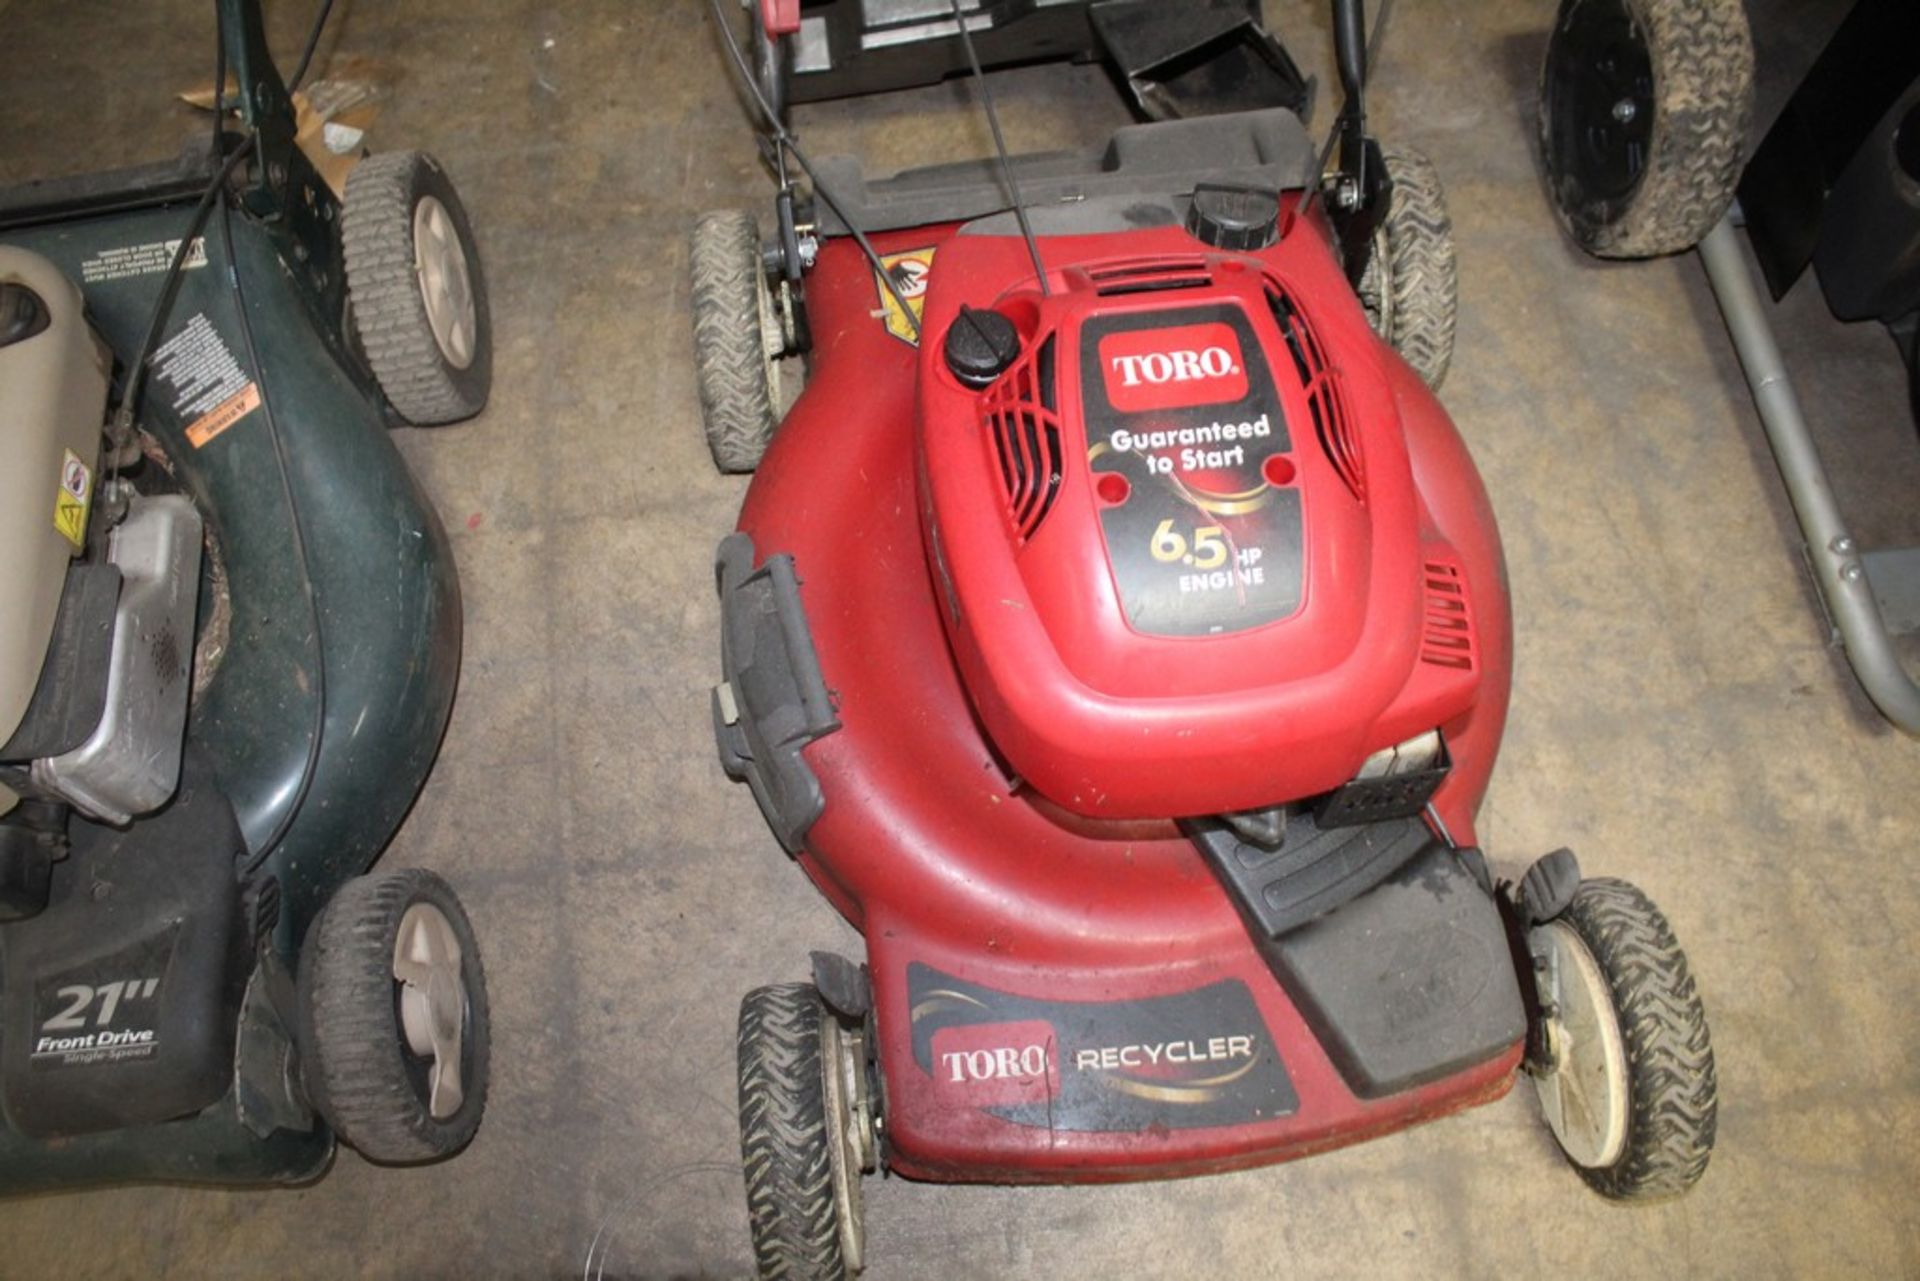 TORO RECYCLER 21" SELF PROPELLED GAS PUSH MOWER WITH BAGGER - Image 2 of 2